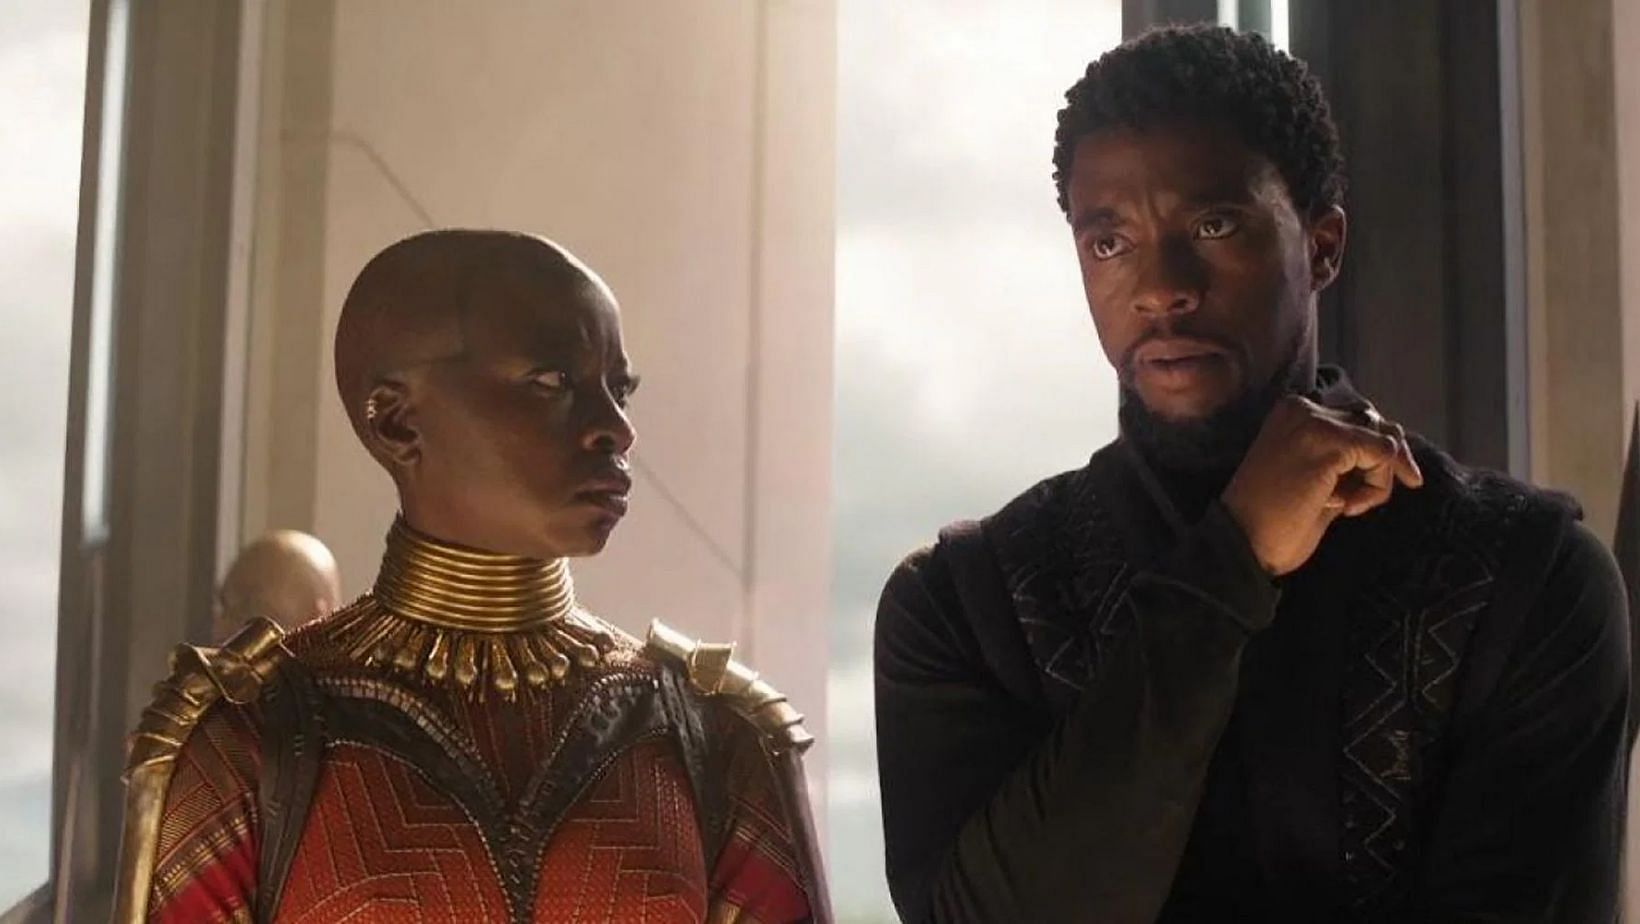 Okoye and T'Challa in a still from Black Panther (Image via Marvel Studios)